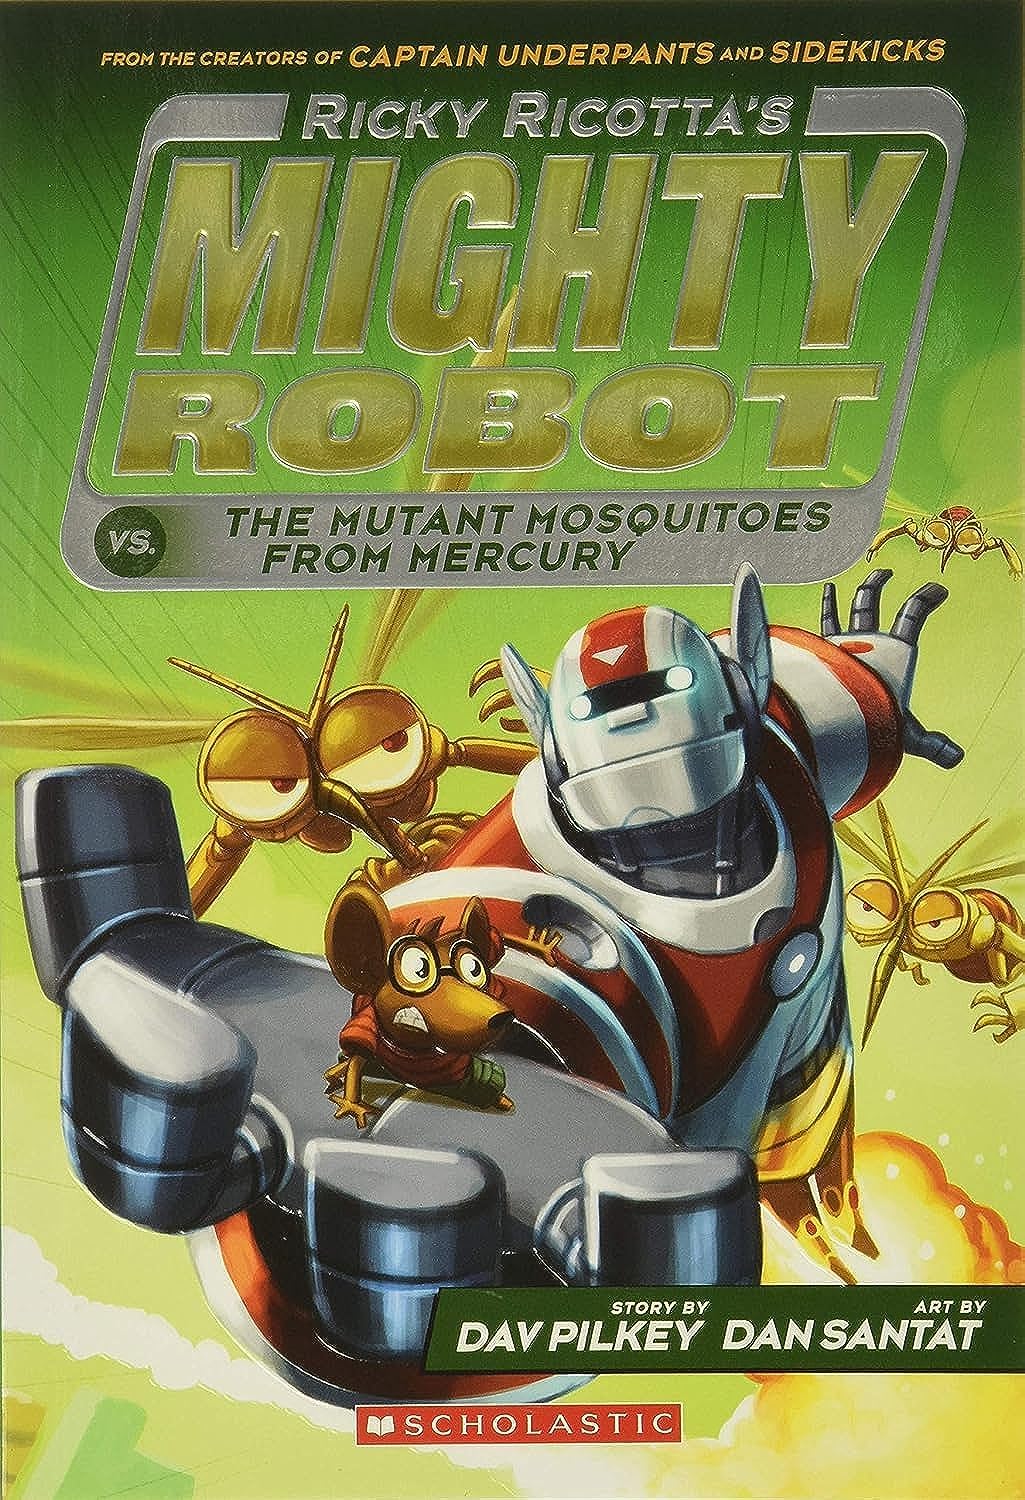 Ricky Ricotta’s Mighty Robot Book Series